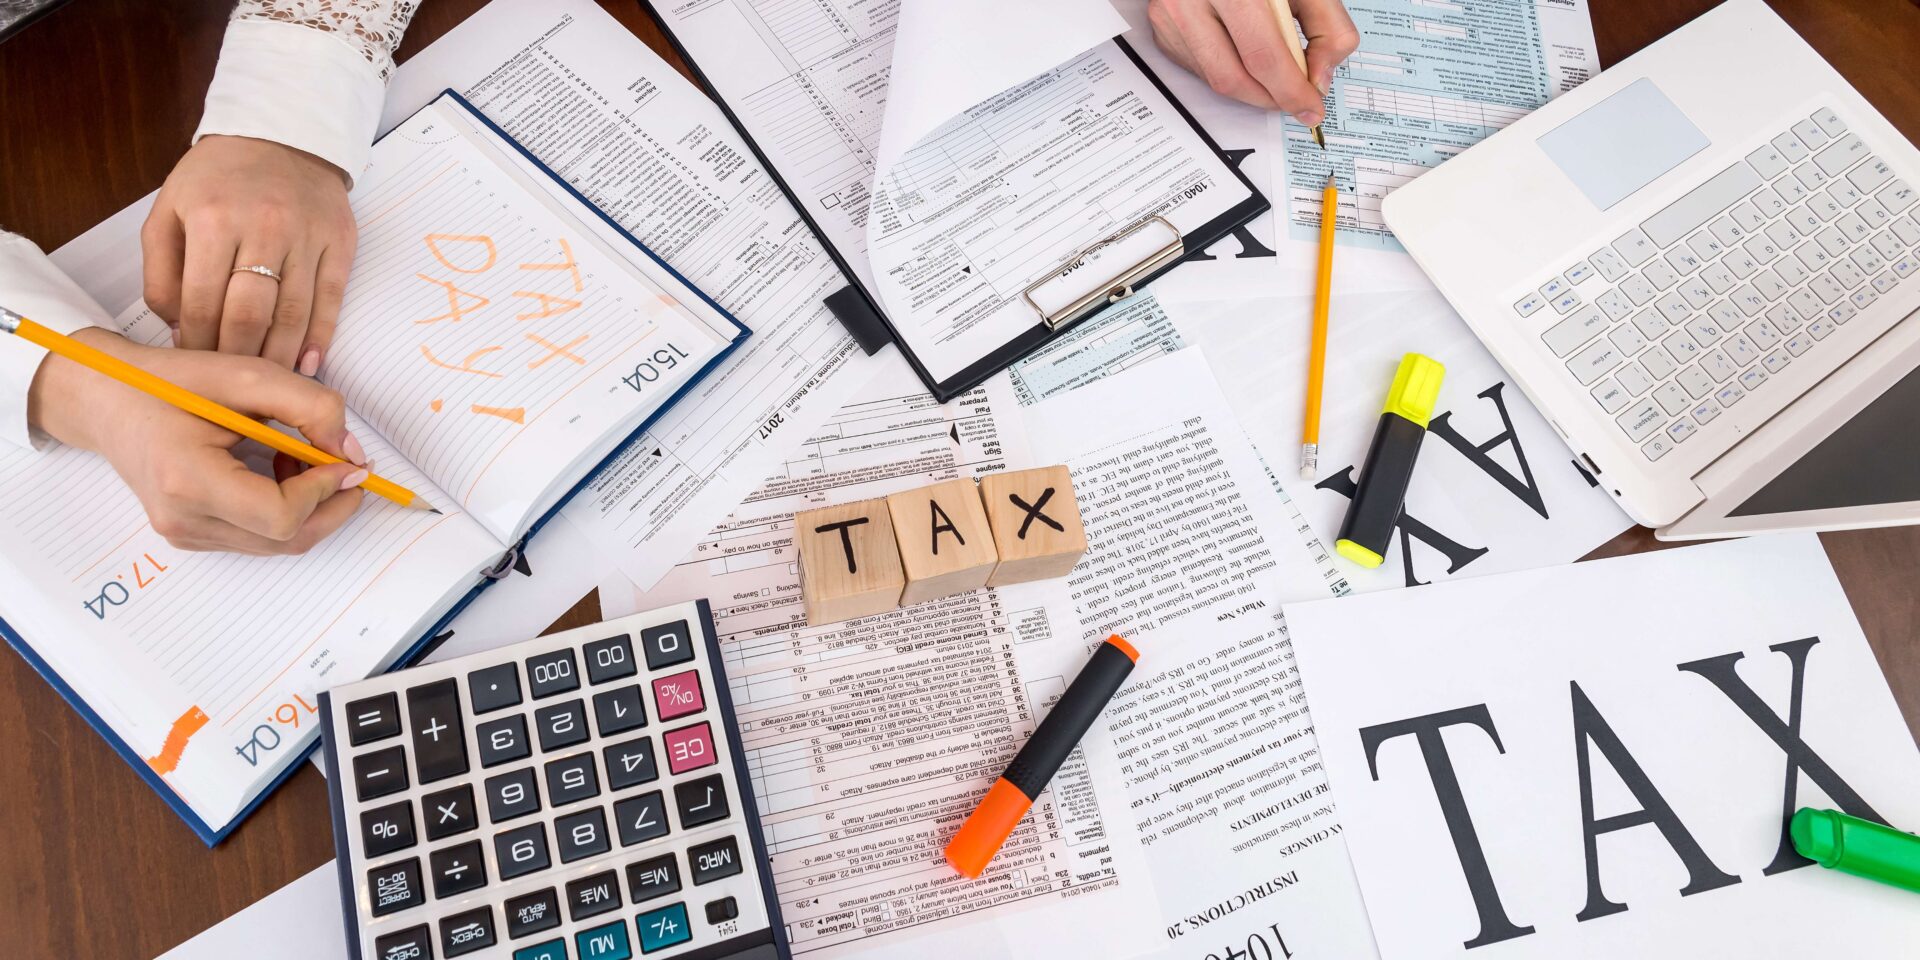 Can You File Your Personal and Business Taxes Together?